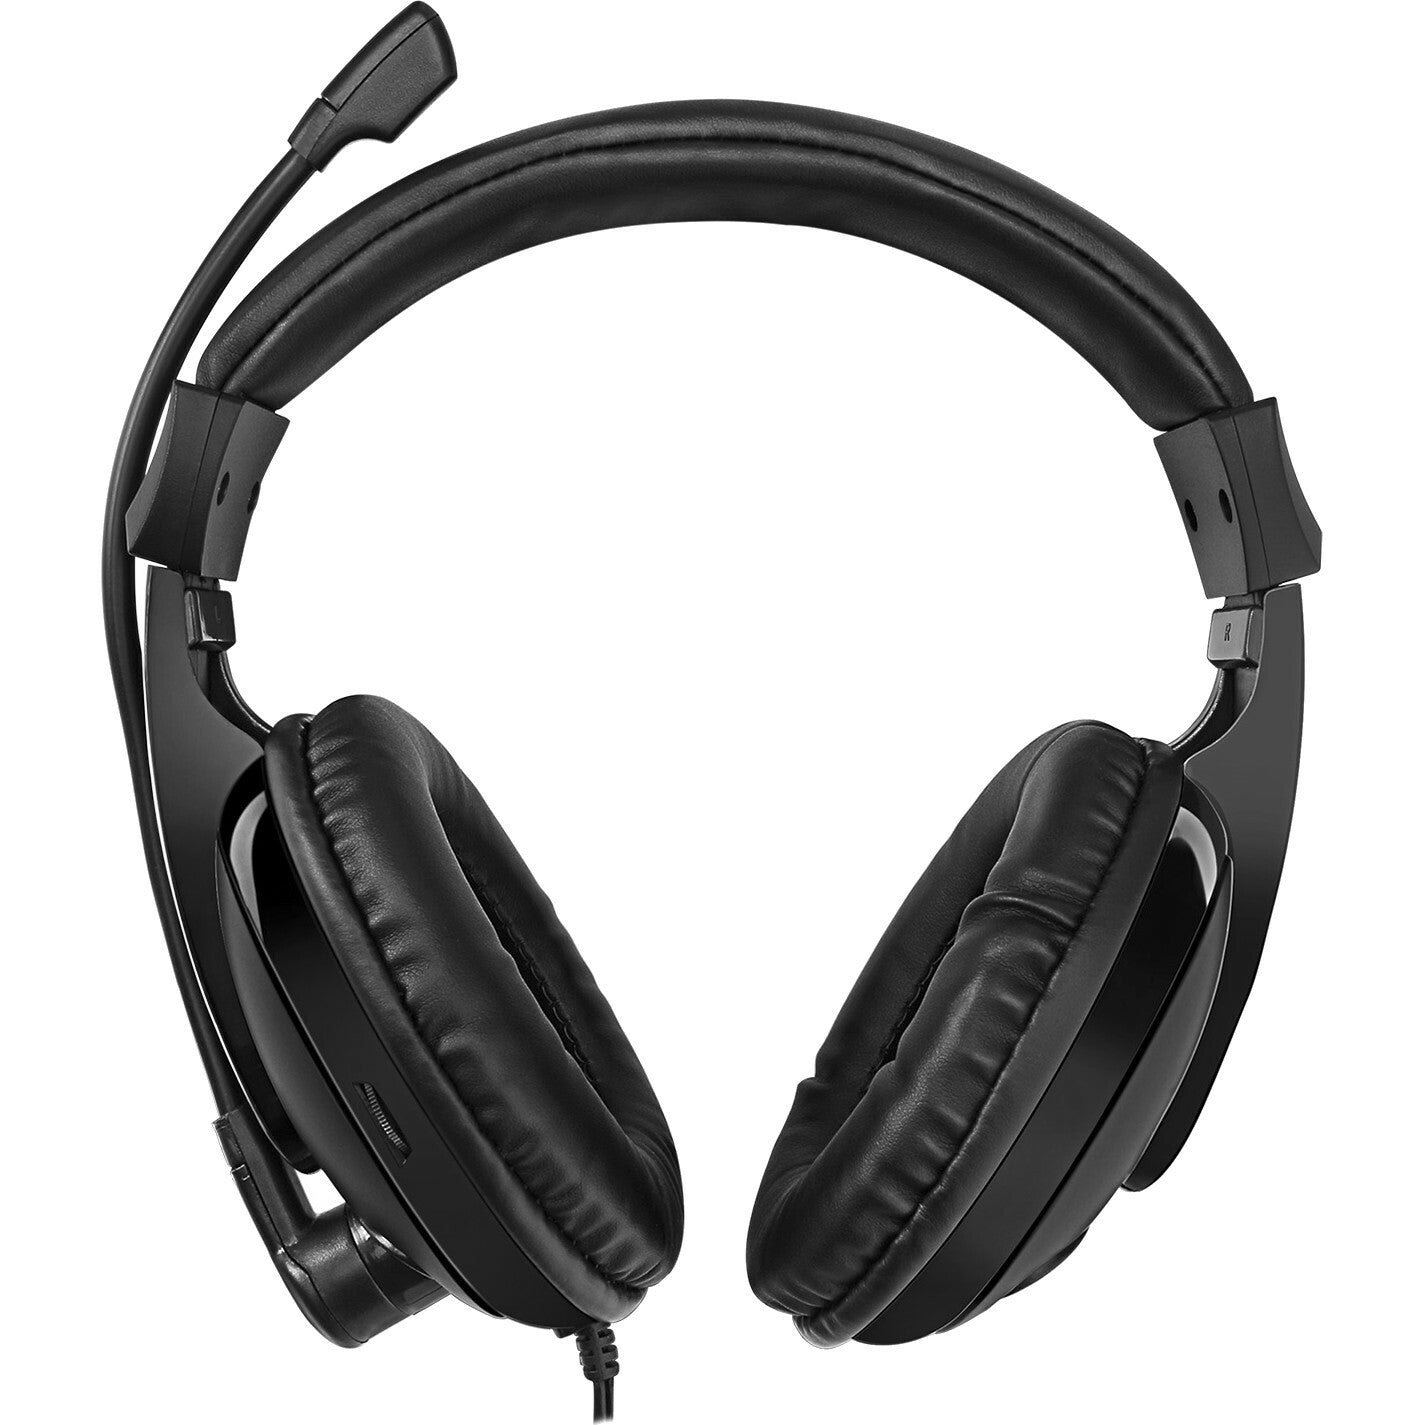 Adesso Xtream H5 - 3.5mm Stereo Headset with Microphone - Noise Cancelling - Wired- Lightweight SpadezStore